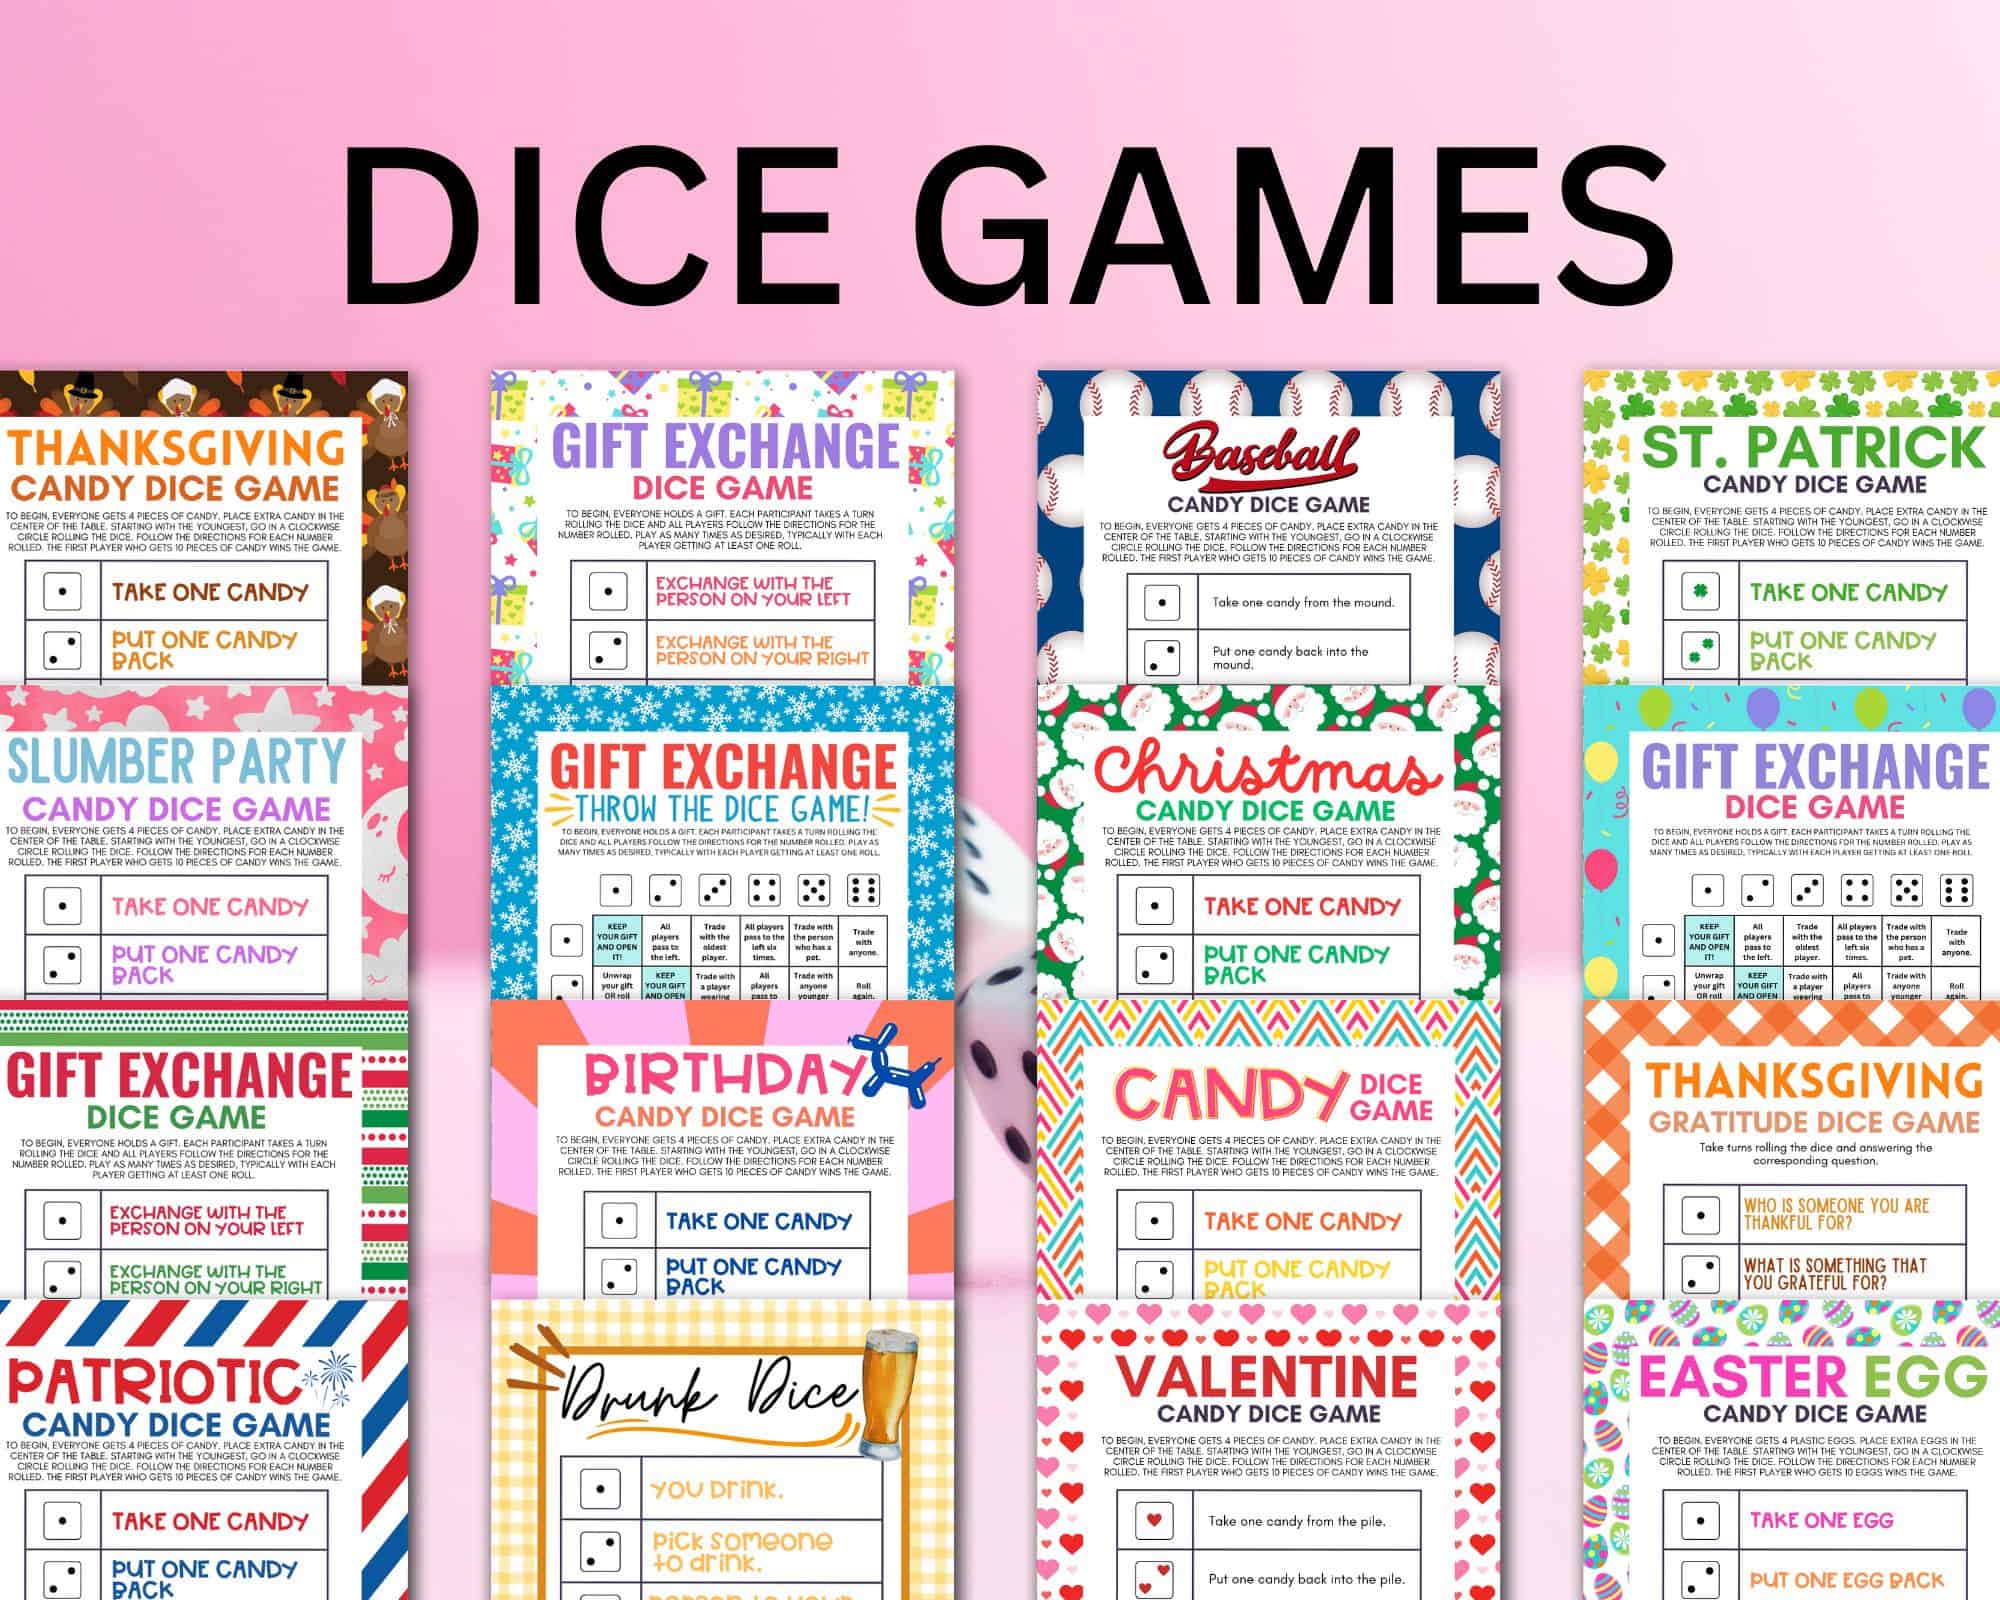 huge list of fun candy dice games for kids